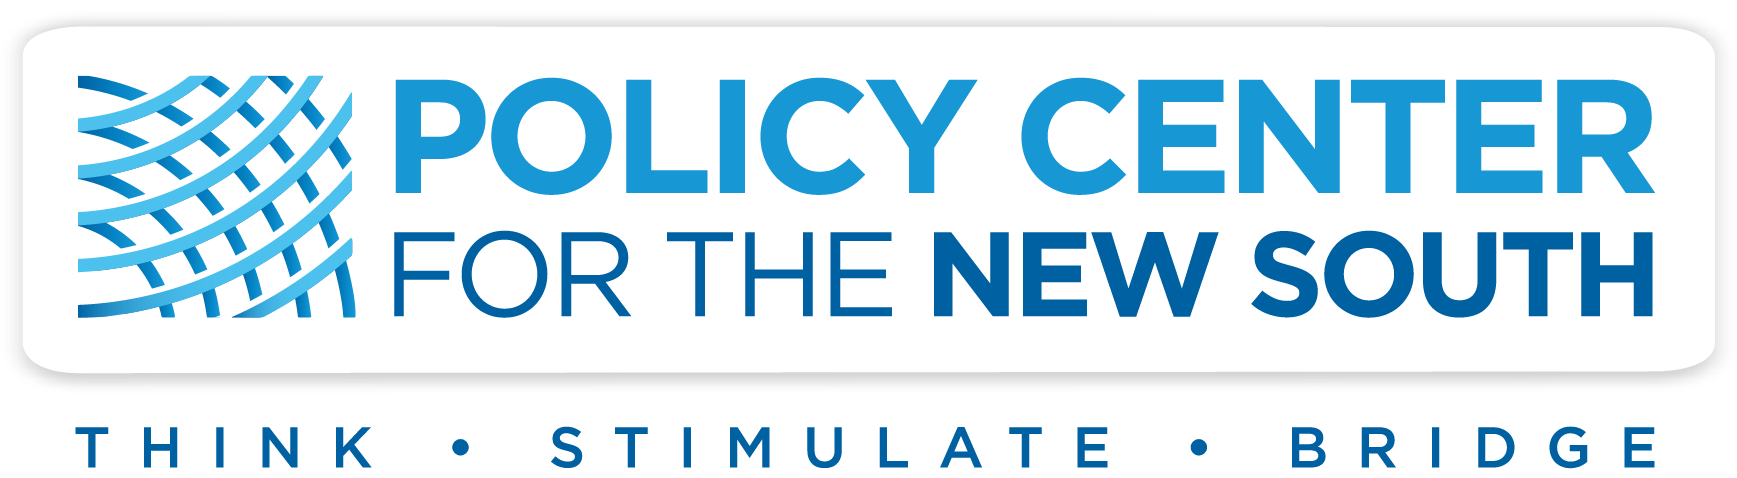 Policy Center for the New South logo